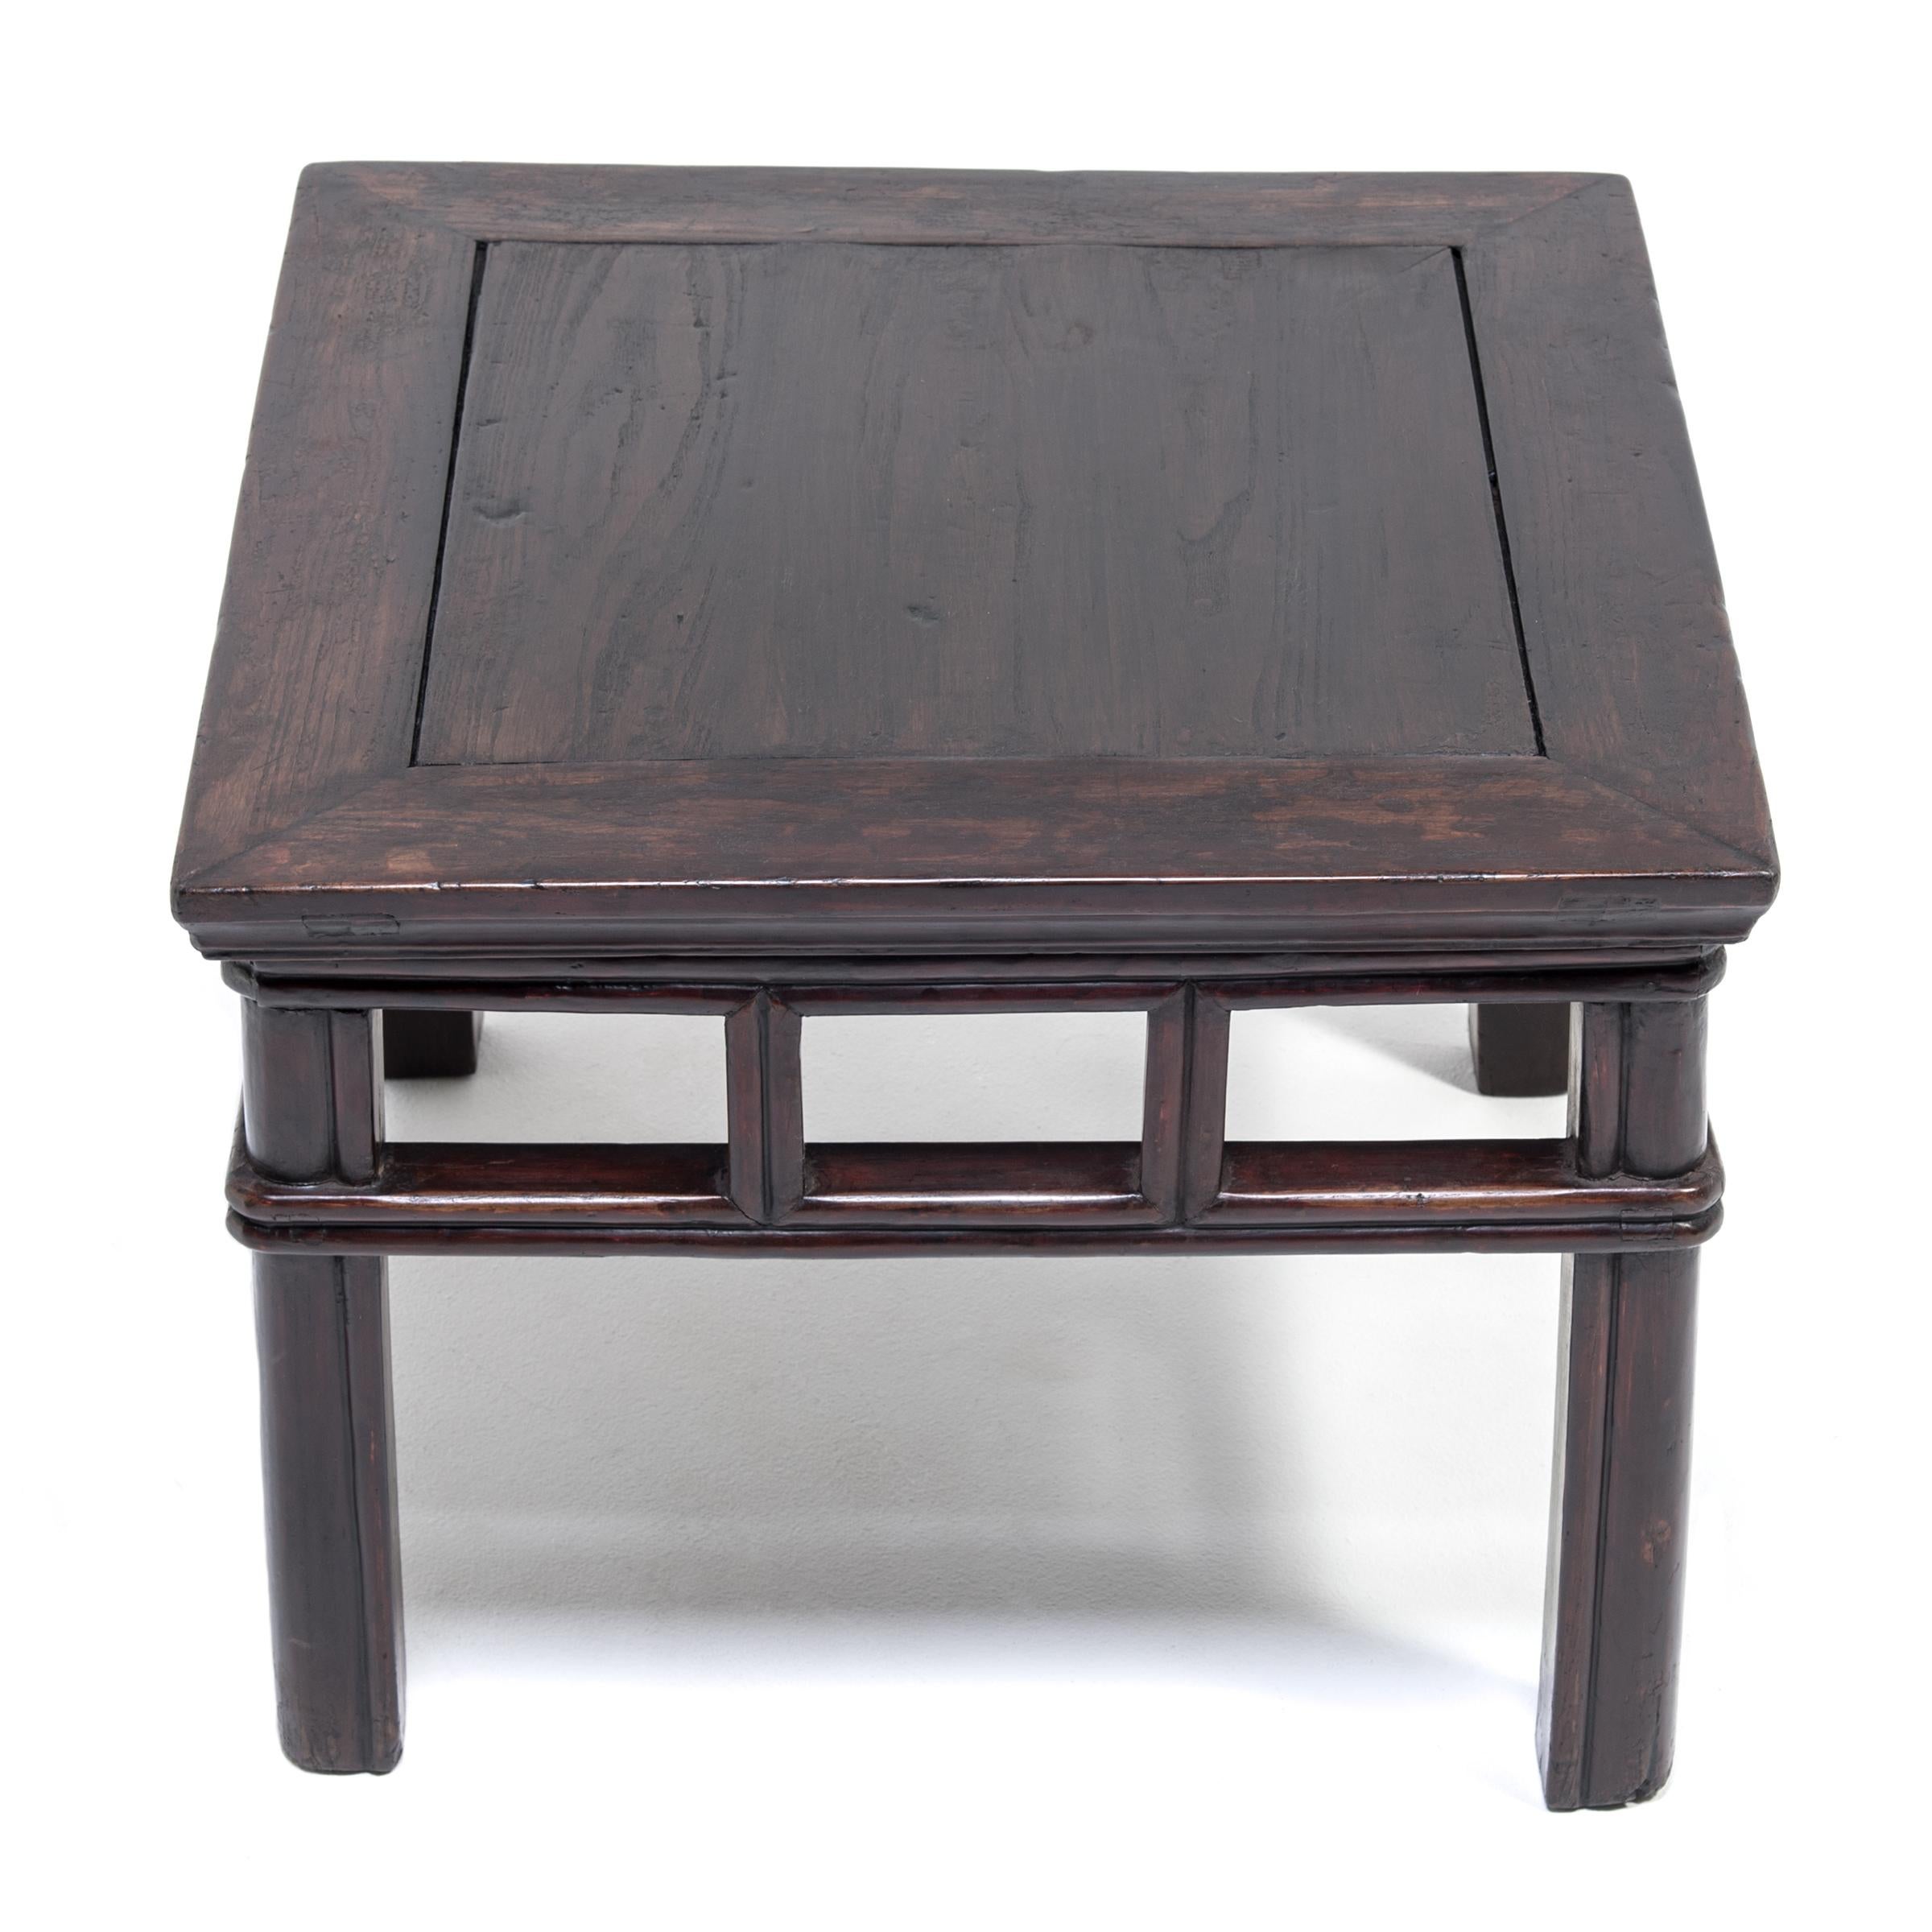 Chinese Black Lacquer Square Stool, c. 1850 In Good Condition For Sale In Chicago, IL